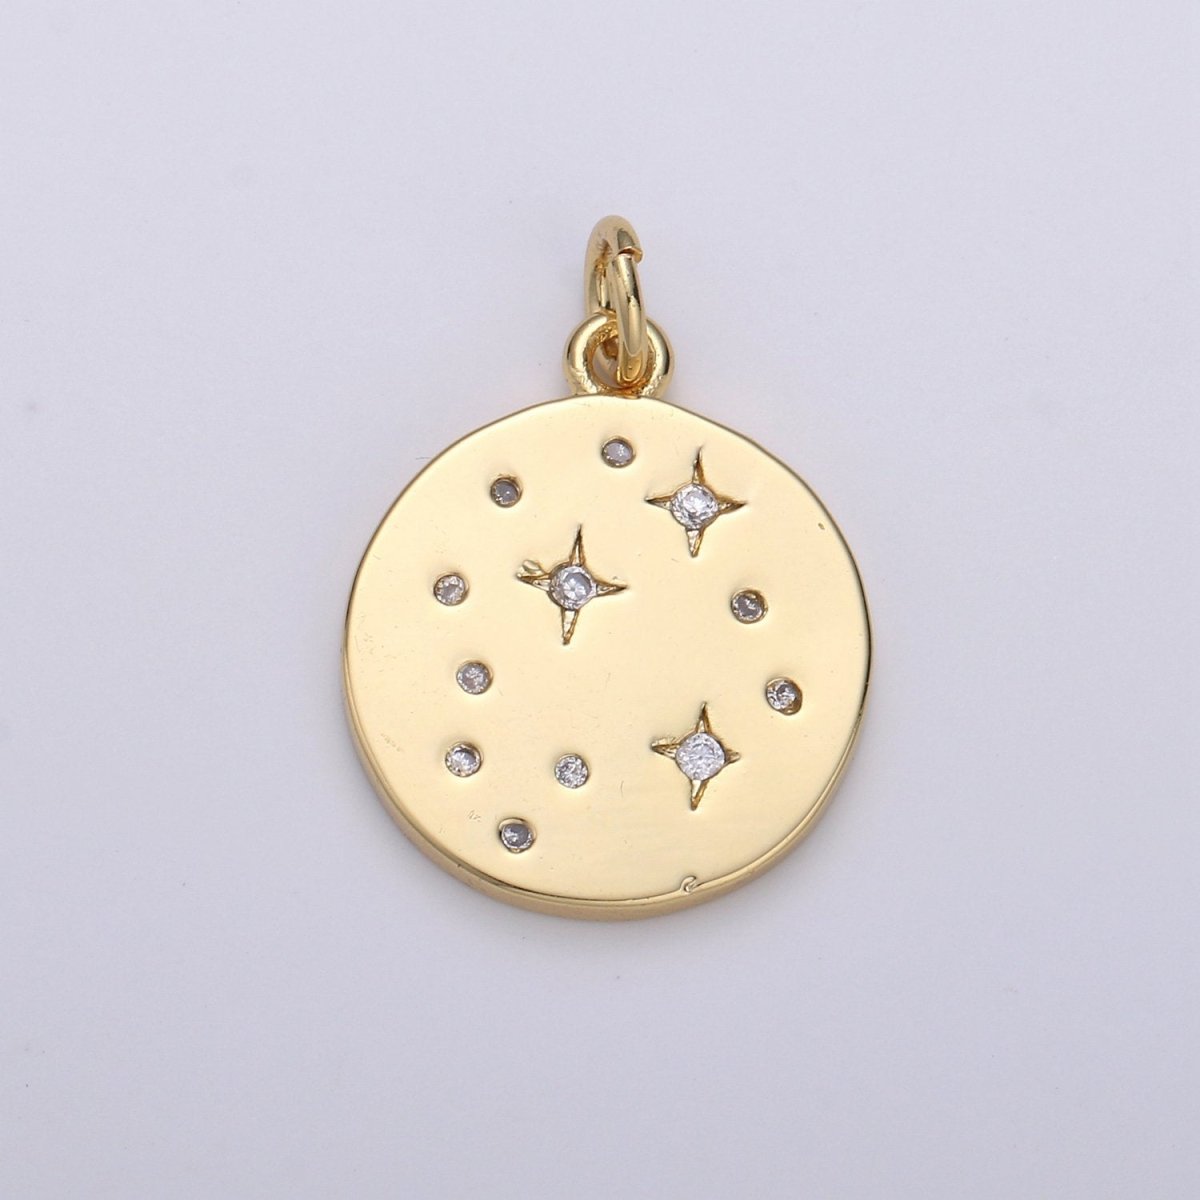 Gold Star Jewelry Gold Sky Galaxy Charm Jewelry Making Supply 24K Gold Filled Findings Silver Celestial Jewelry D-530 D-531 - DLUXCA